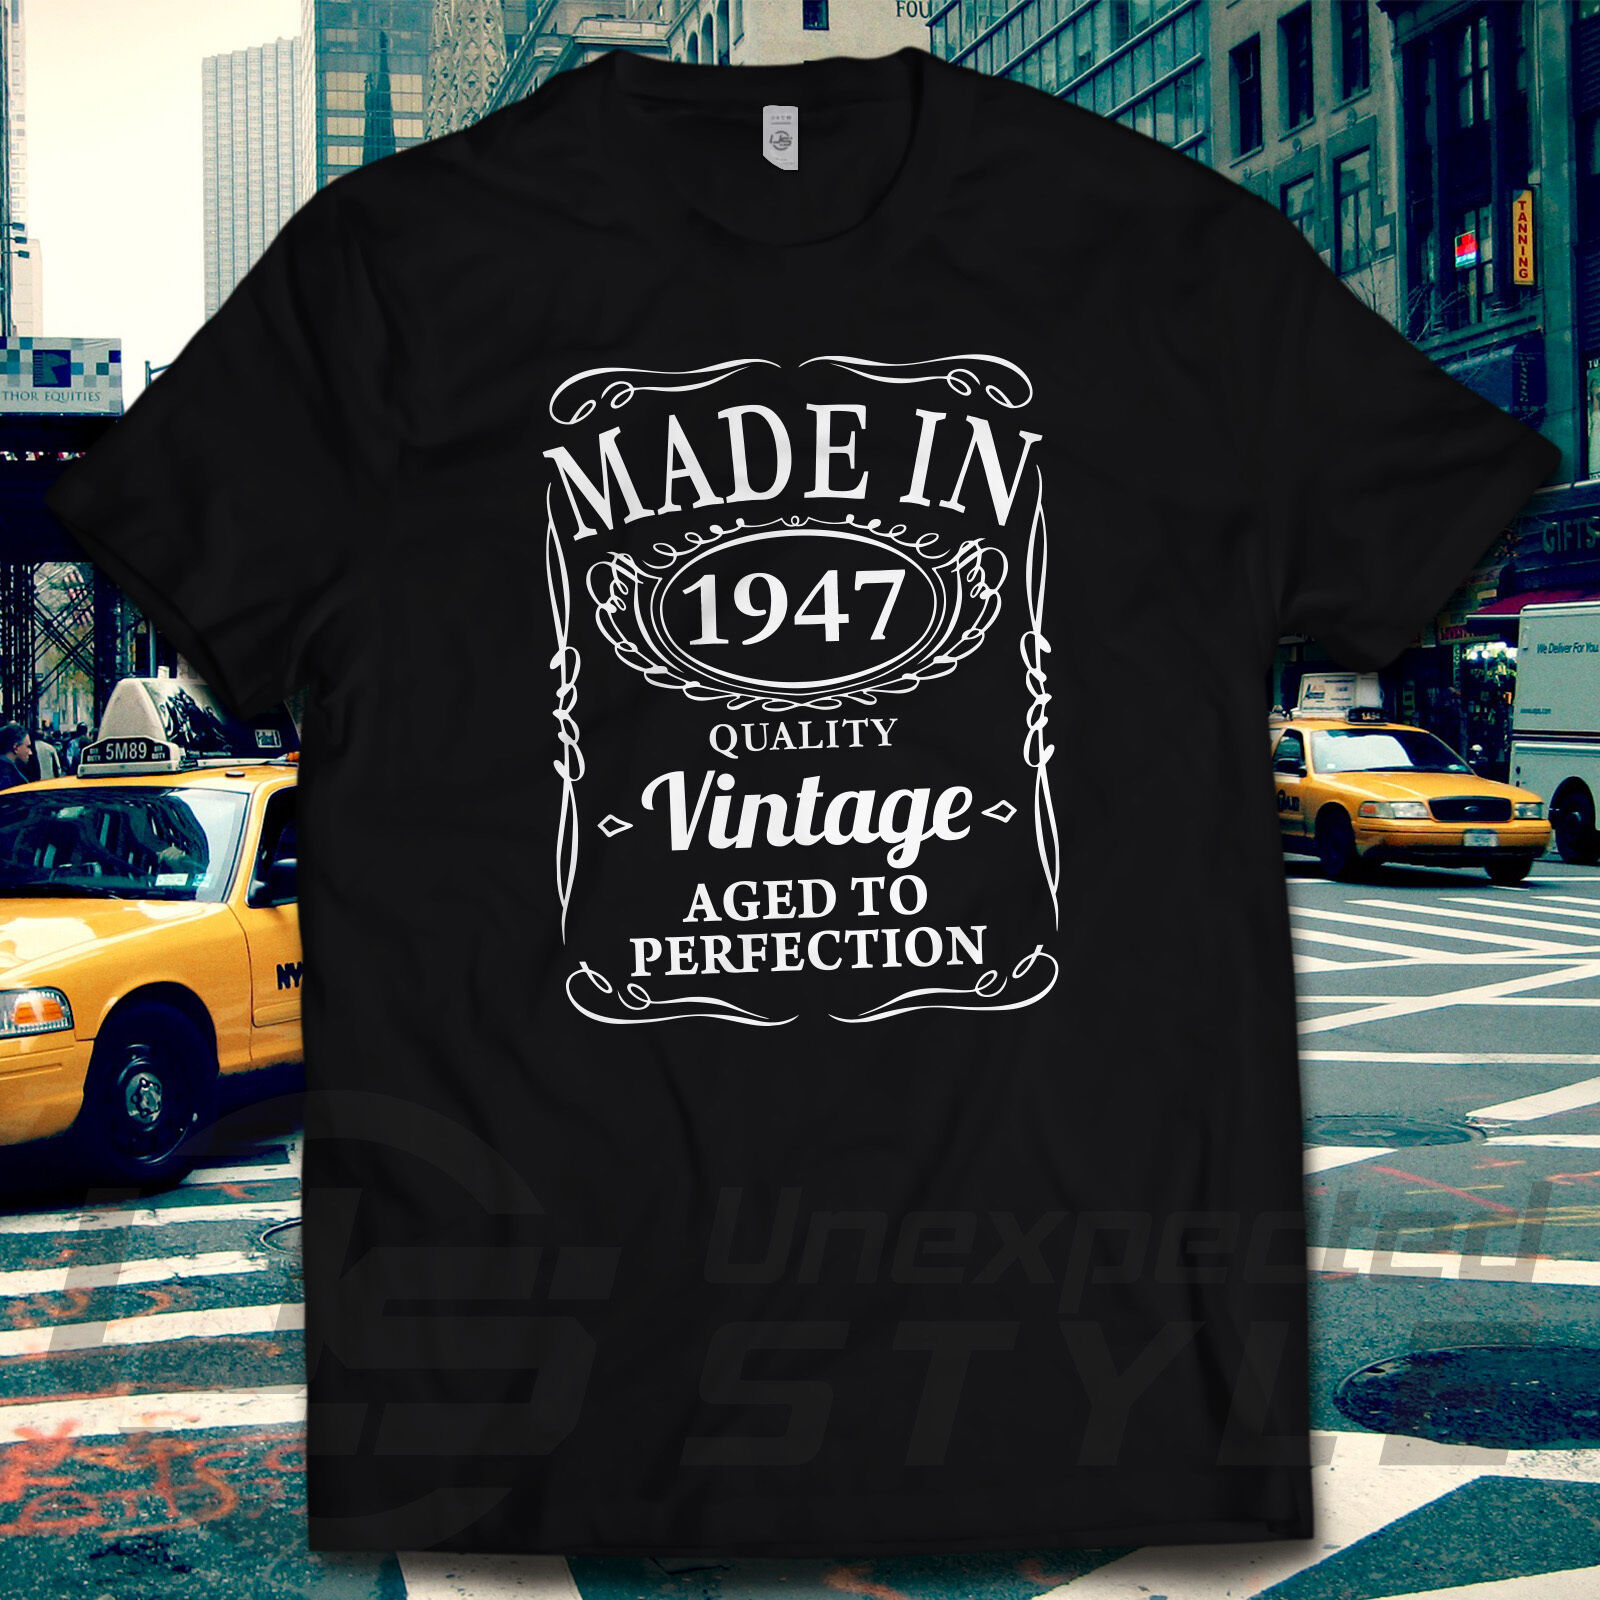 VINTAGE 1947 AGED TO PERFECTION T-shirt MADE IN 1947 BIRTHDAY Tshirt gift tee